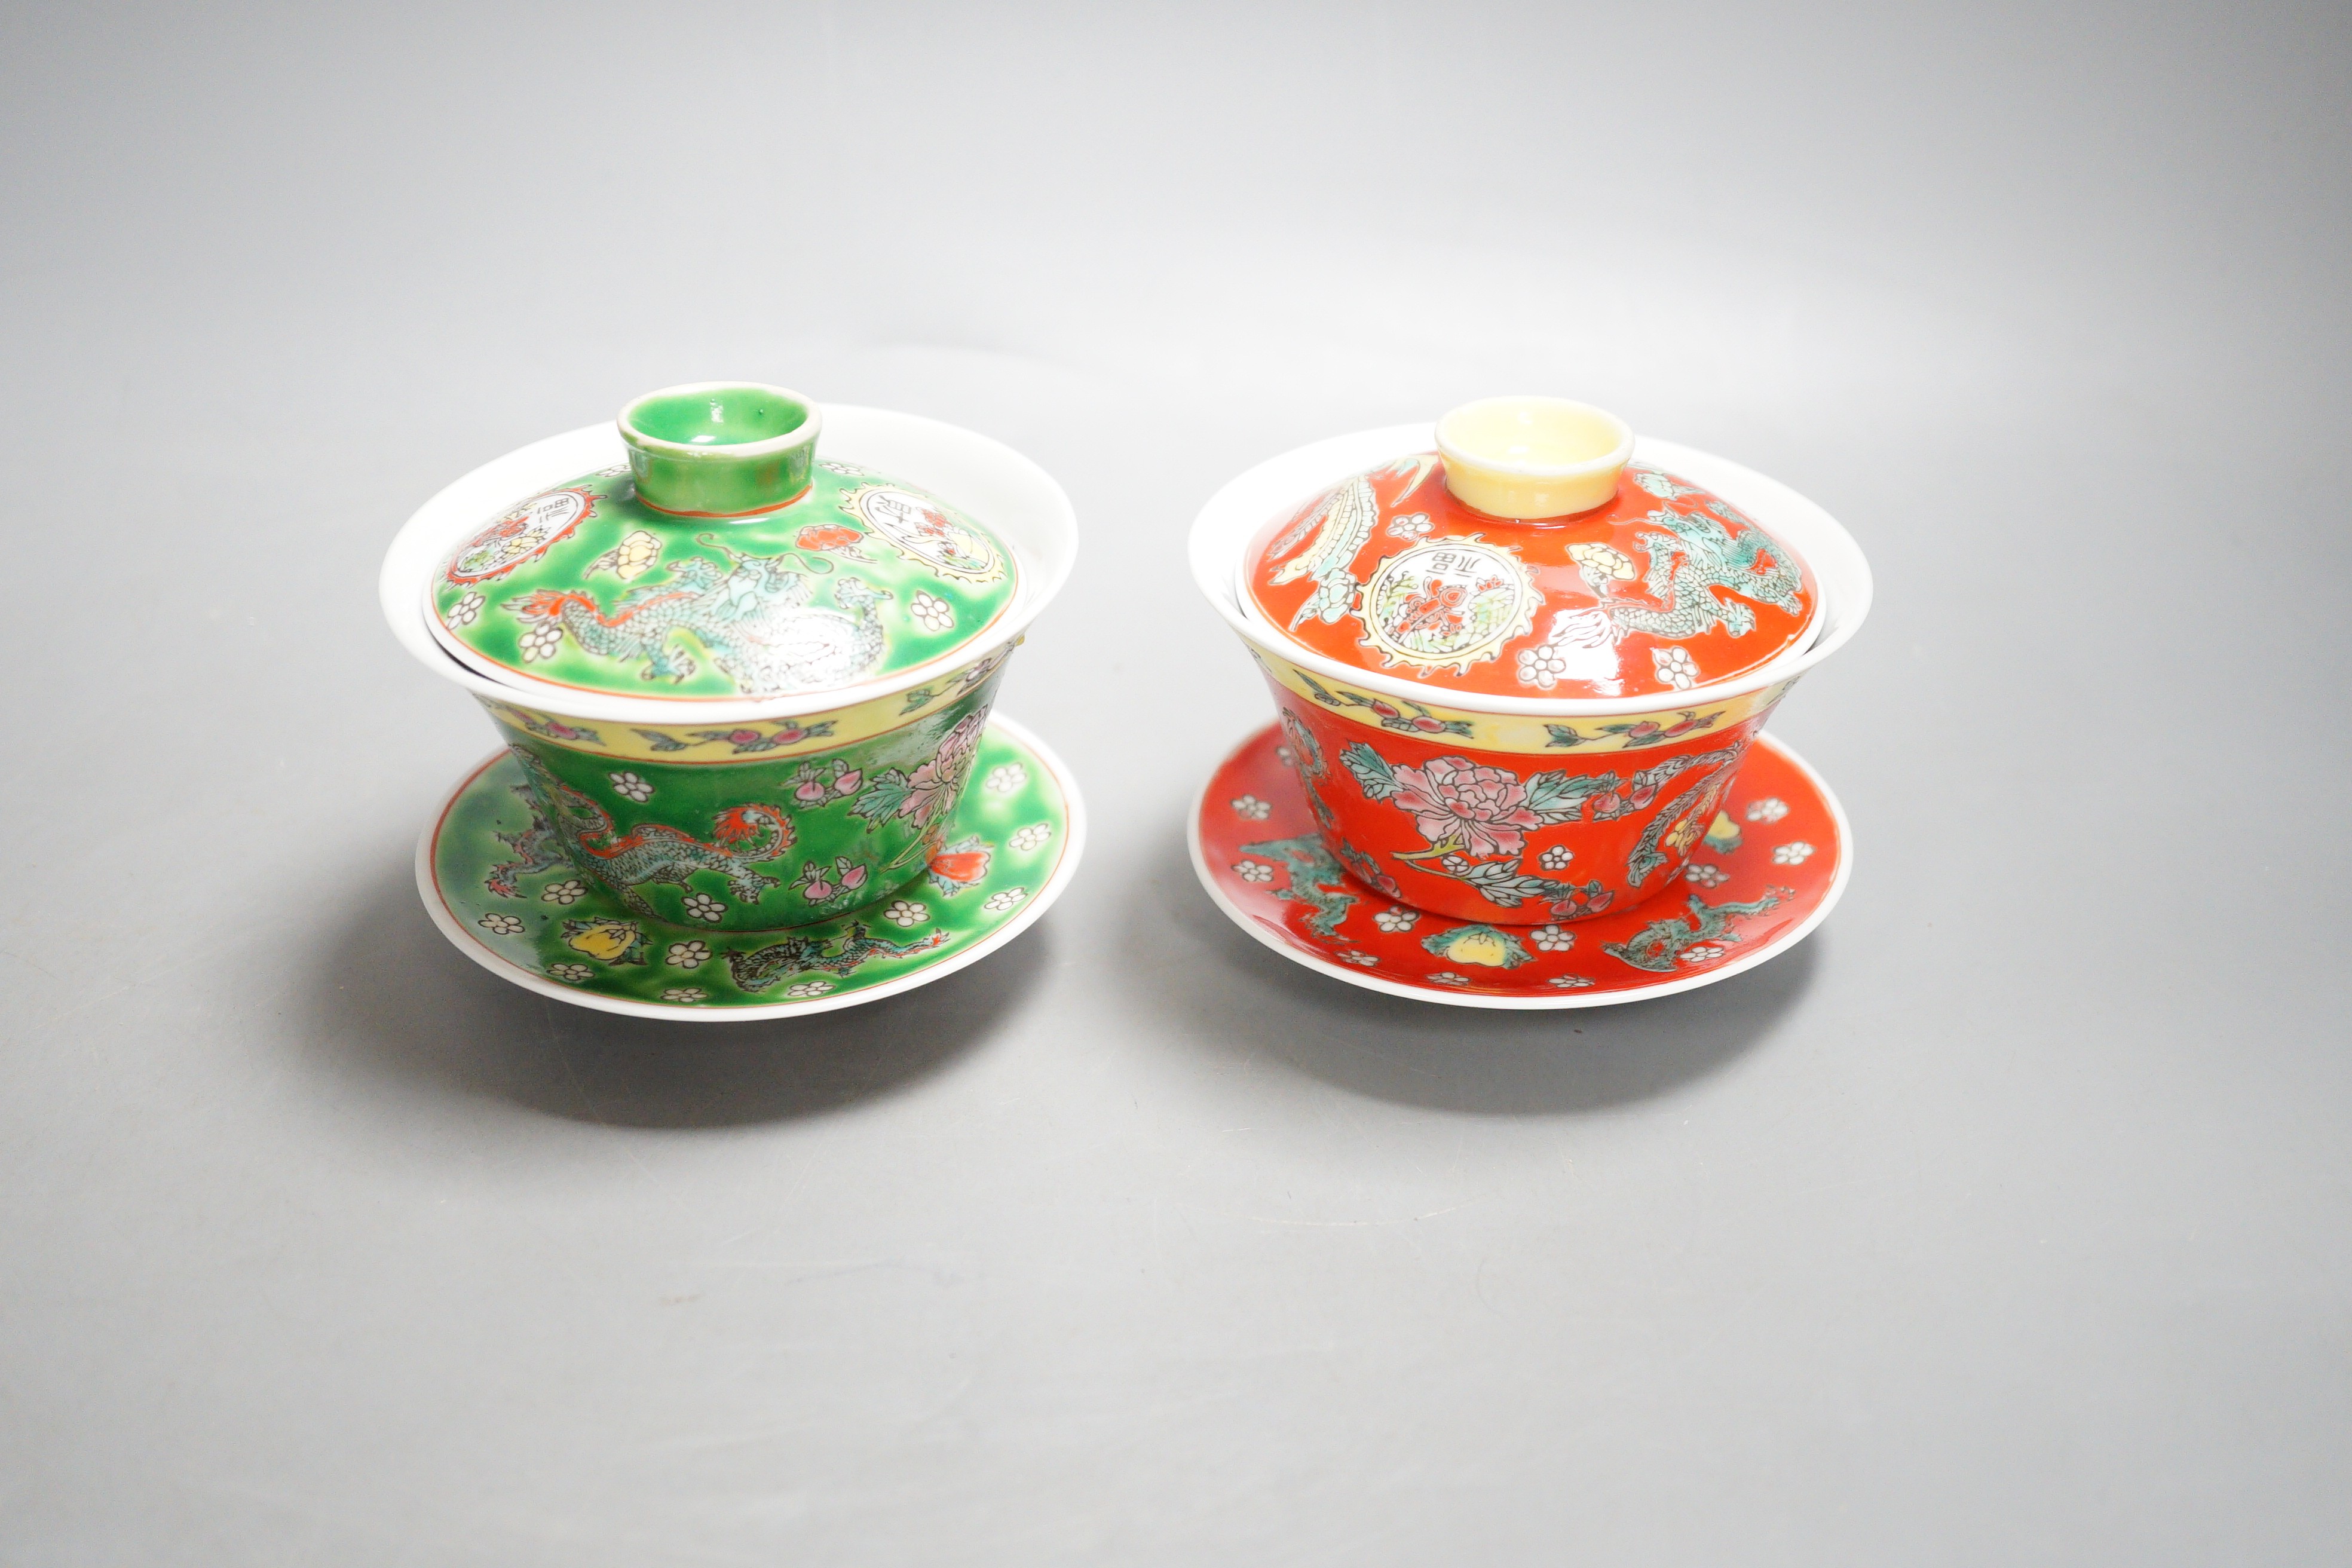 Two Chinese enamelled porcelain bowls, cover and stands and one plate, 19th/20th century, 20.5cm - Image 4 of 7